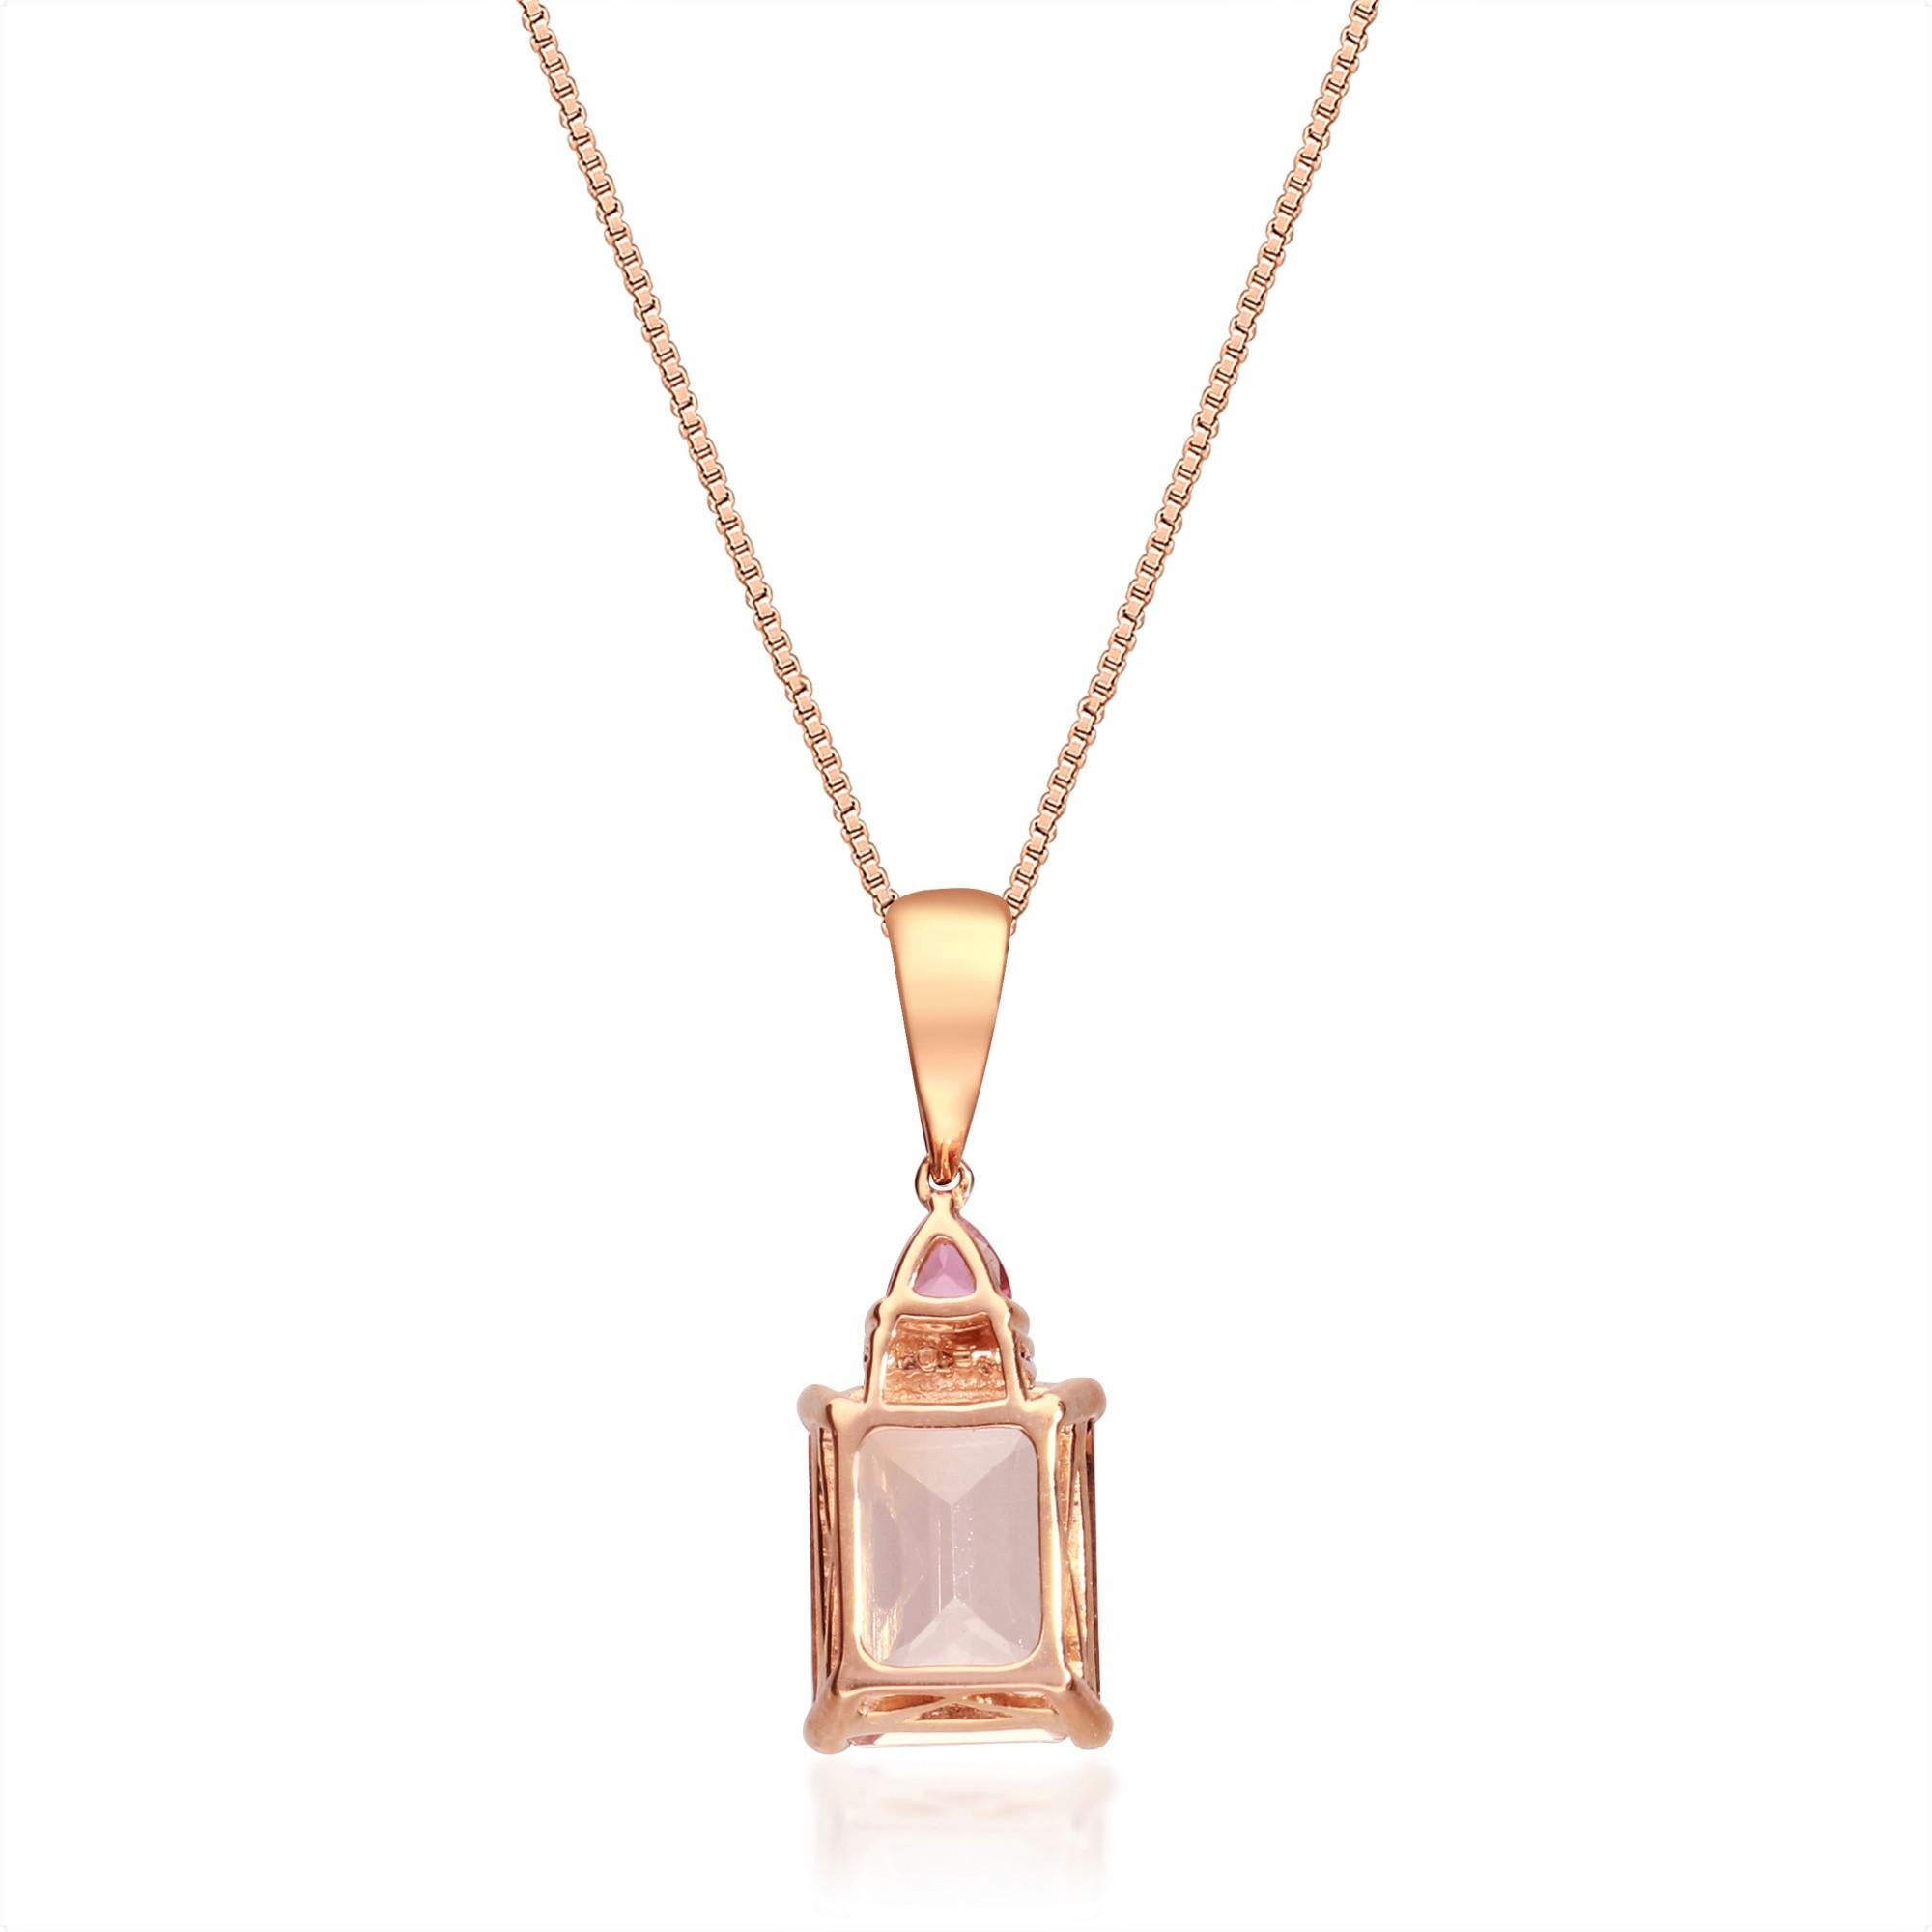 2.75 Carat Morganite Emerald Cut, Pink Tourmaline and Diamond 14K Gold Pendant In New Condition For Sale In New York, NY